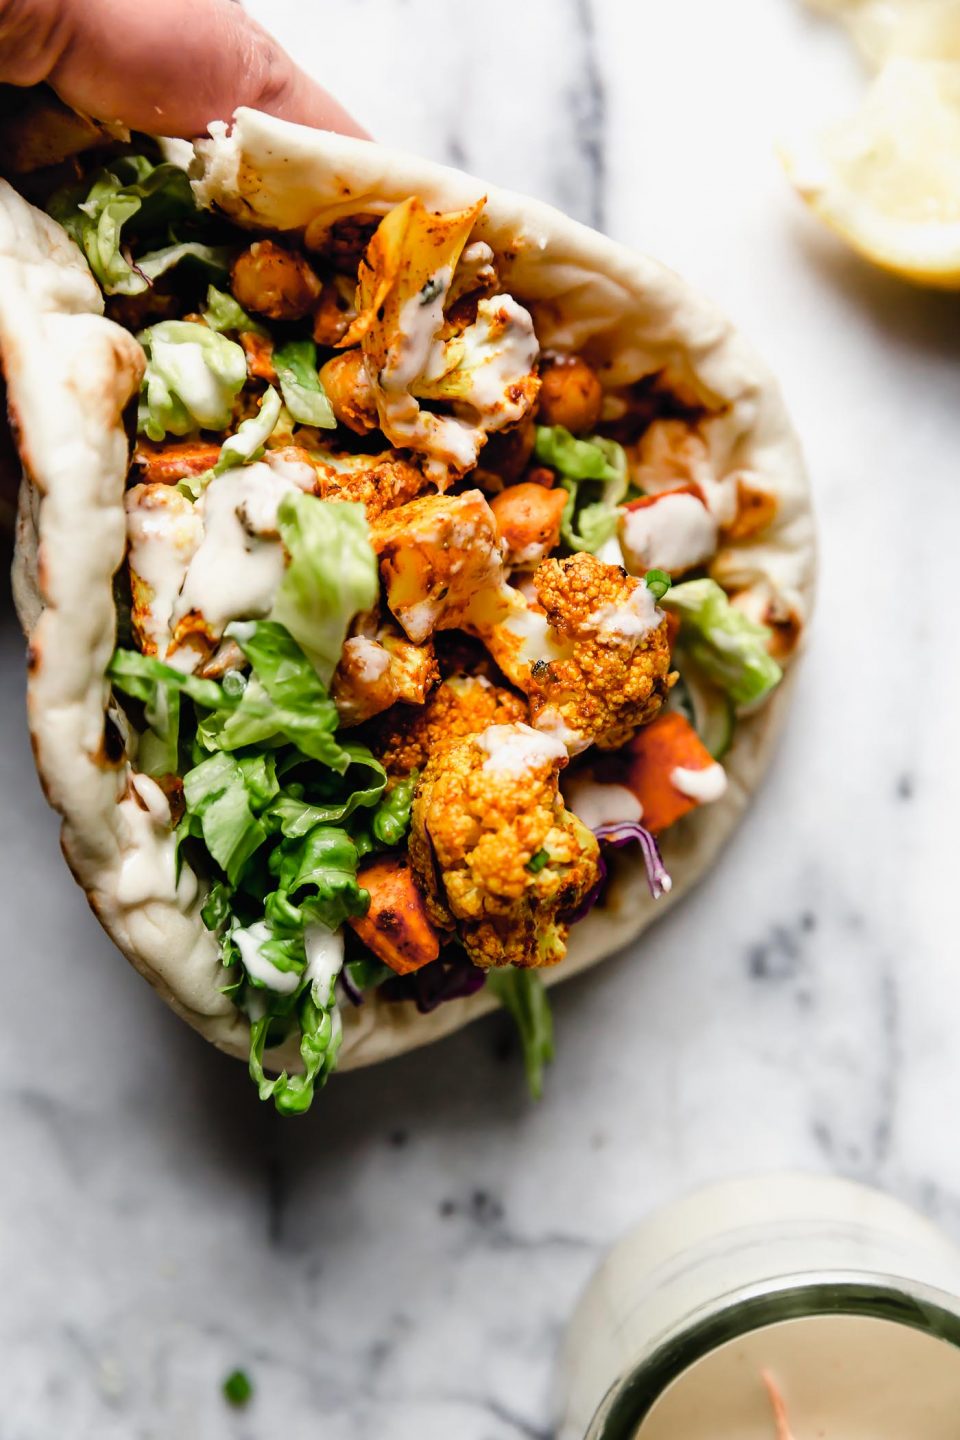 Vegetarian shawarma served in a pita, topped with a drizzle of tahini sauce. A woman's hands are reaching into the frame of the photo, holding the sandwich.